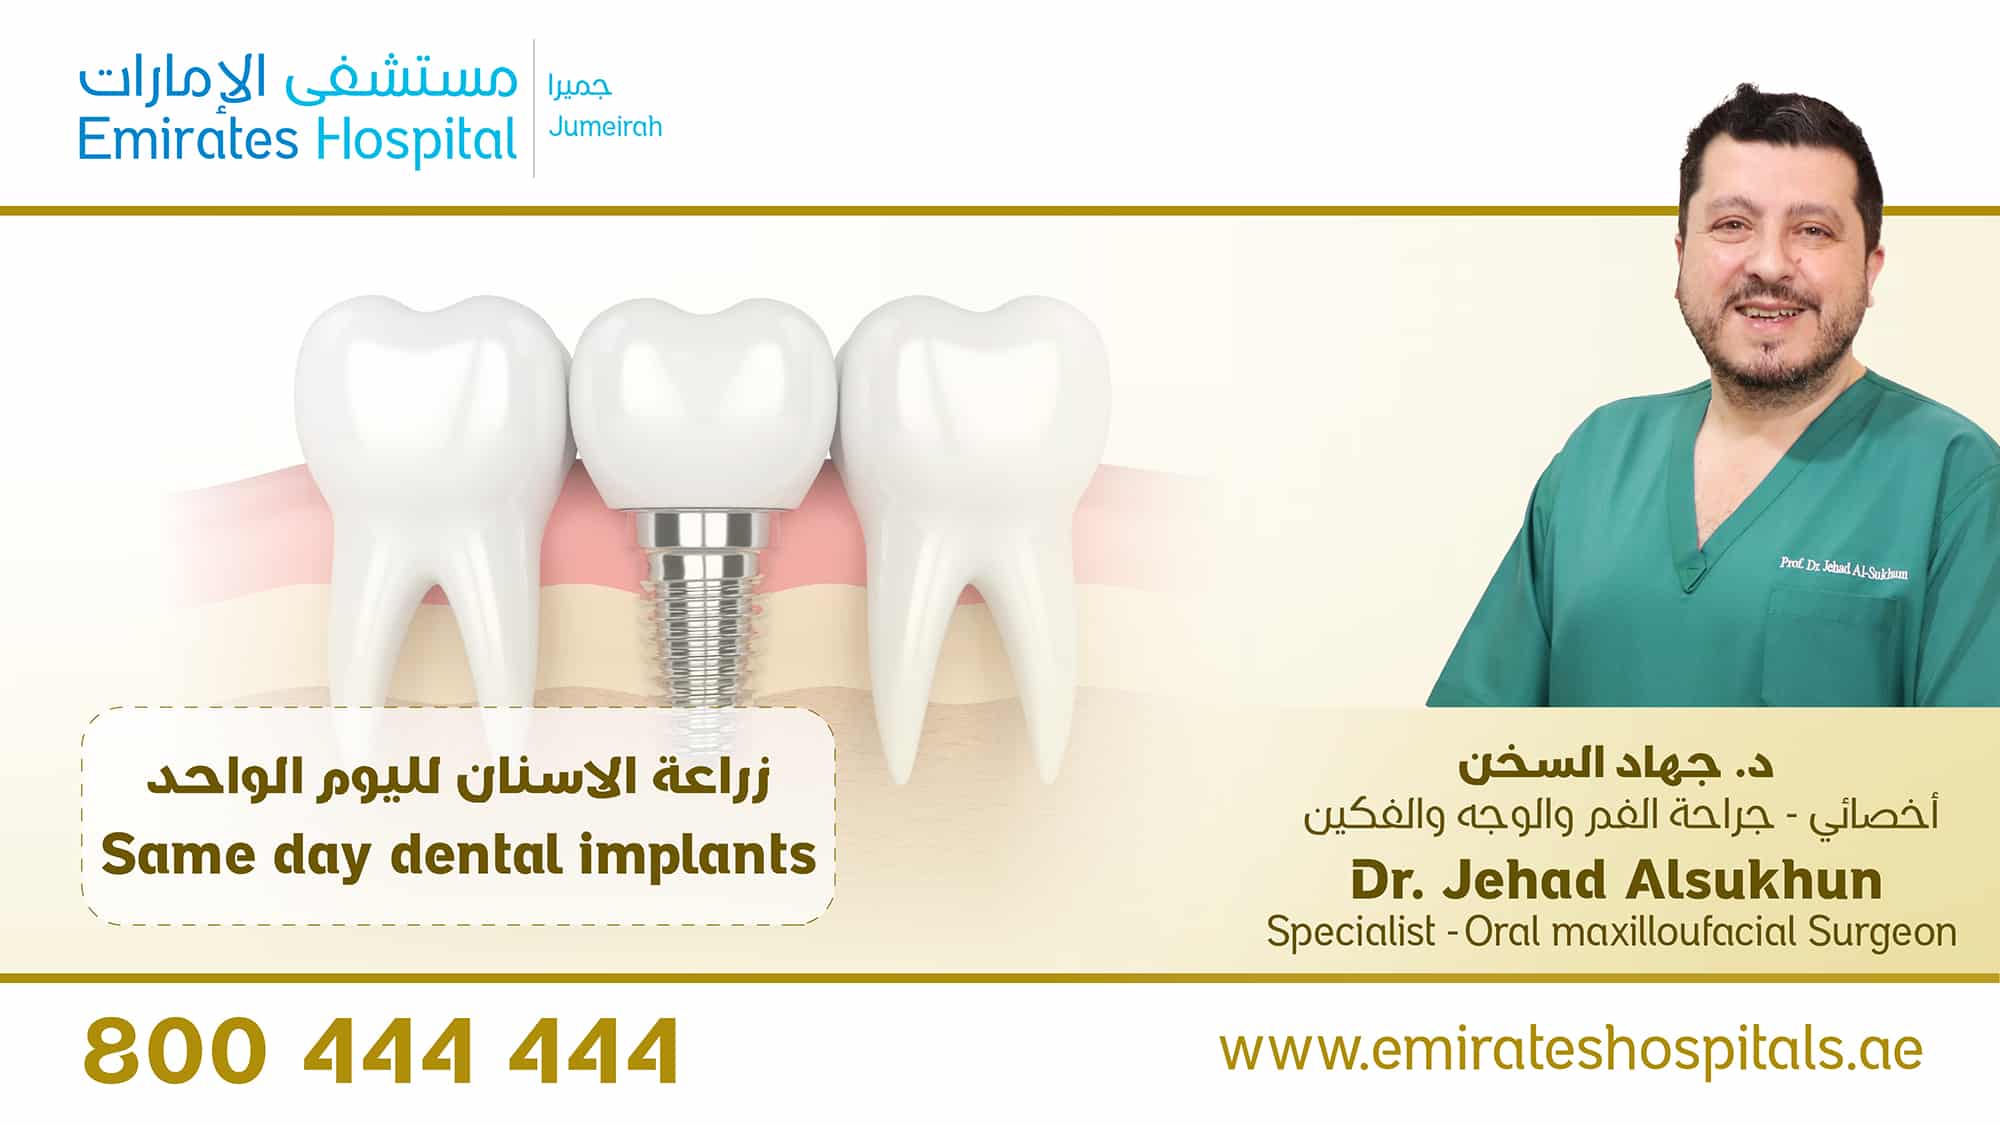 Same Day Dental implants - Dr. Jehad Alsukhun , specialist in oral and maxillofacial surgery